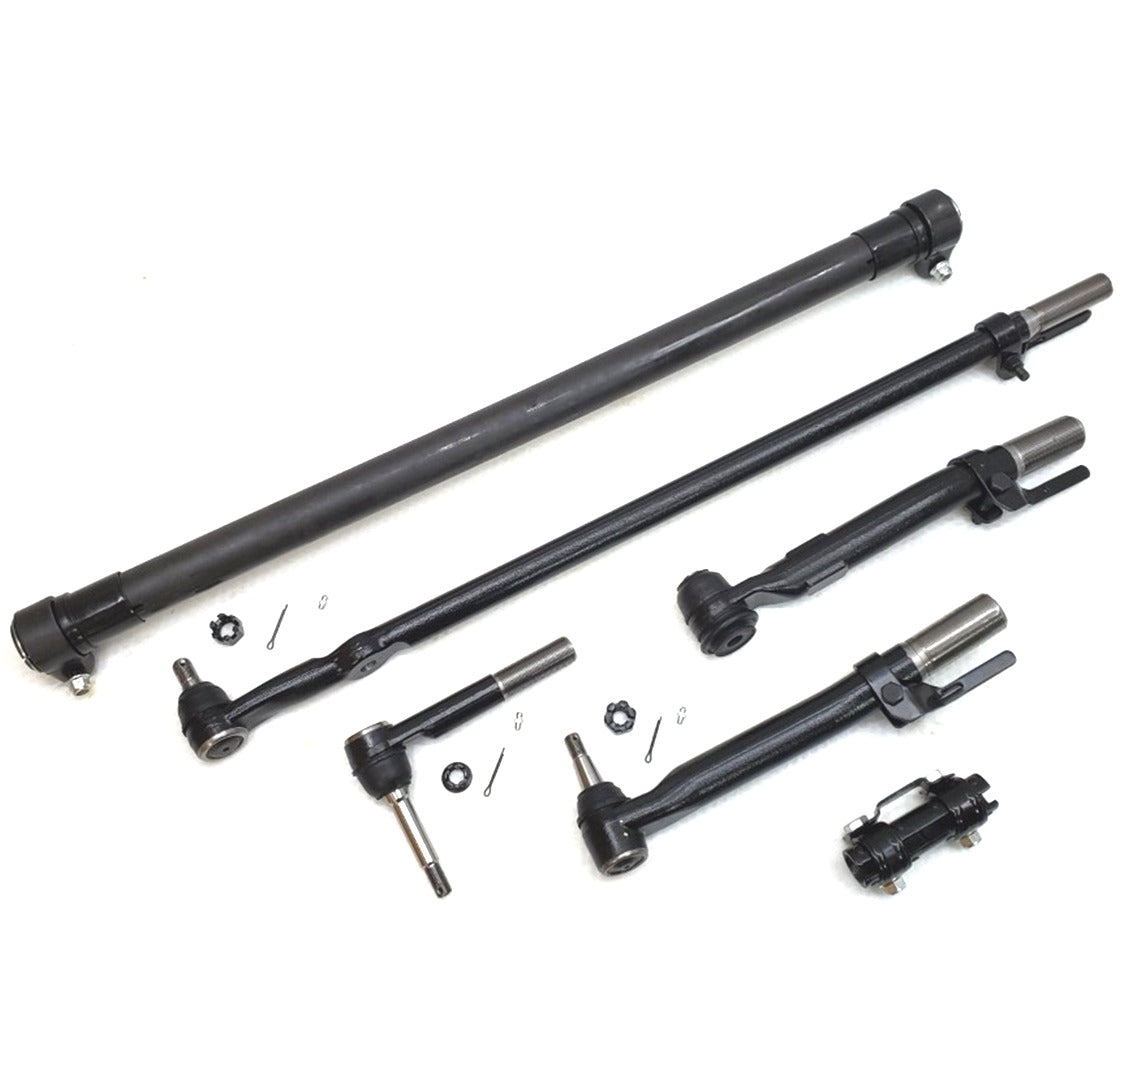 HD Drag Link Tie Rod Sleeve Steering Kit for 2008-2010 Ford F250, F350 Super Duty 4x4